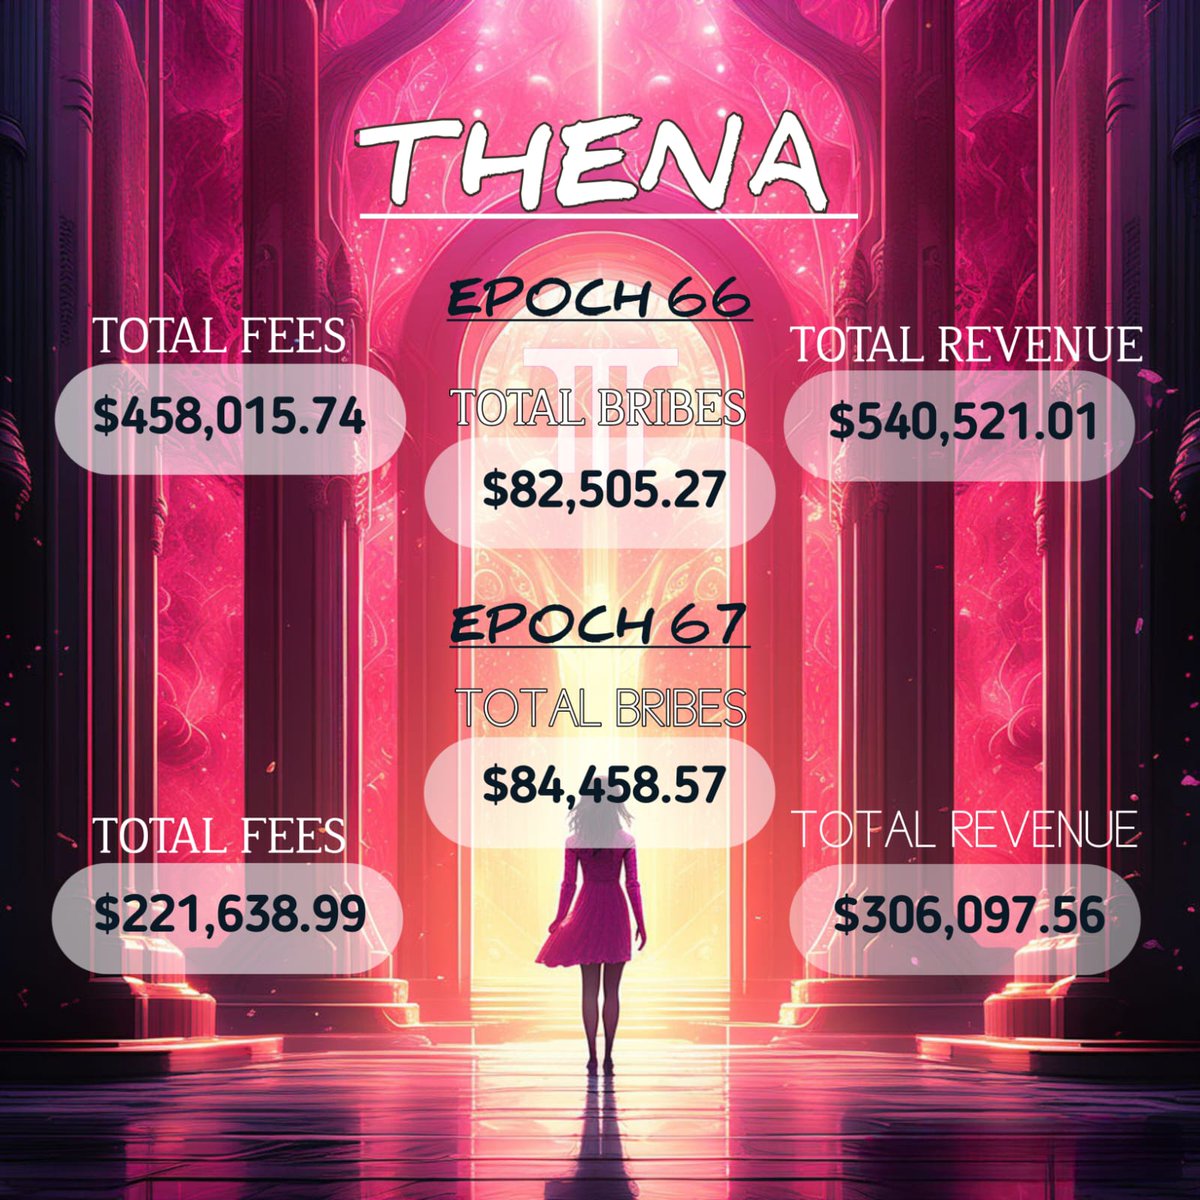 Summary of @ThenaFi_ Epoch 67:
       
💰 Fees:        $221,638.99      
💰 Bribes:     $84,458.57
💰 Revenue : $306,097.56

💫Another great epoch for thenians.